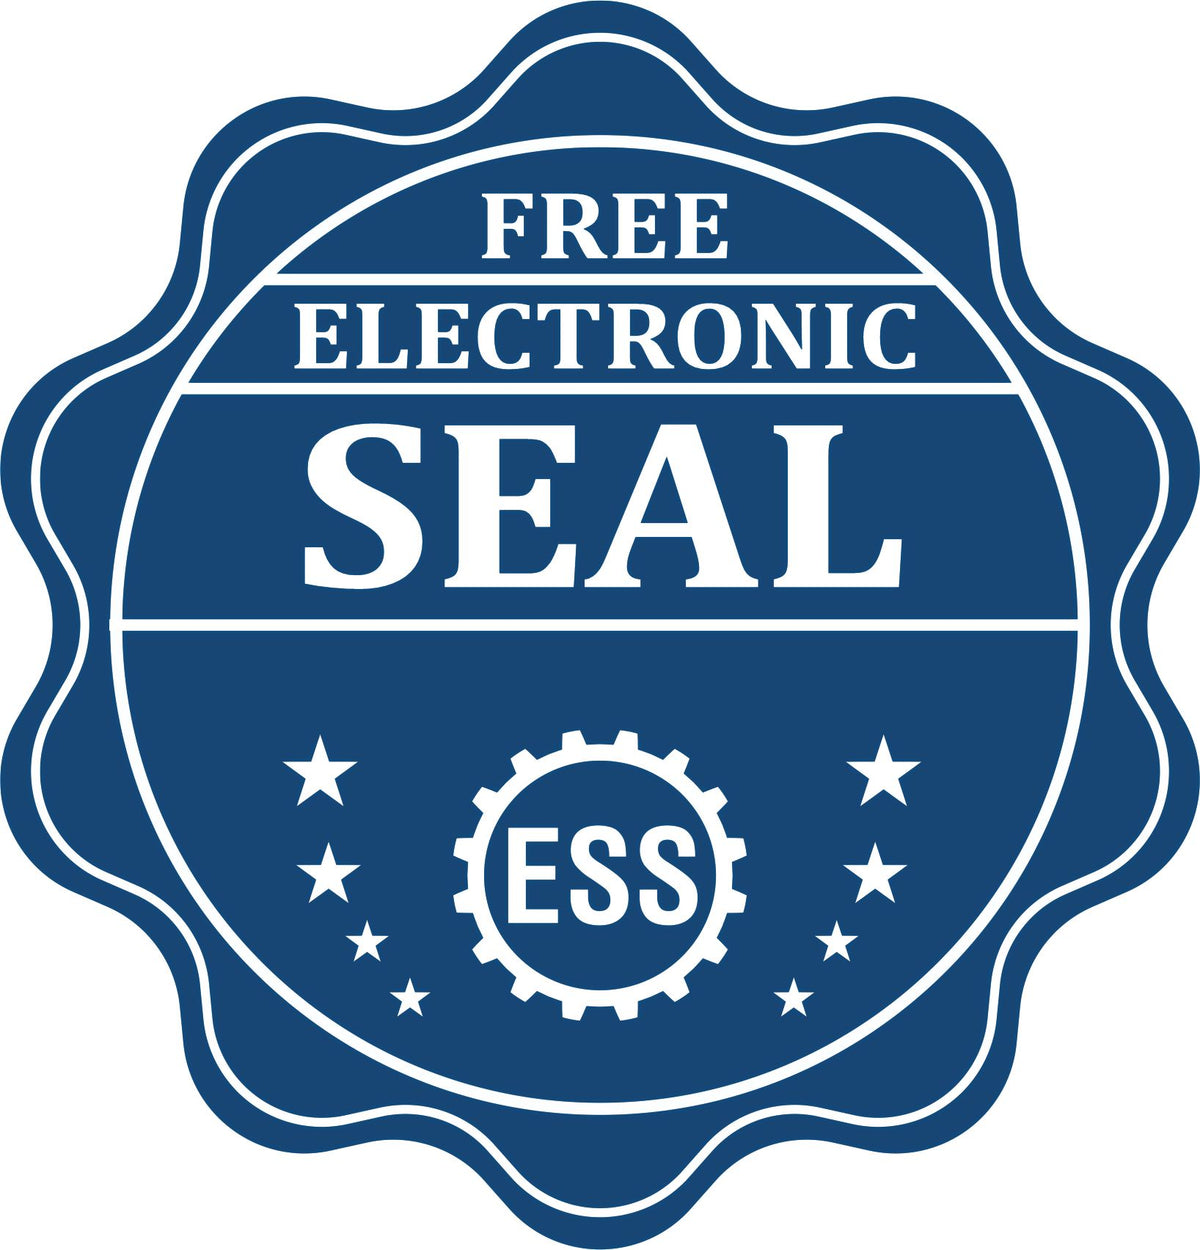 A badge showing a free electronic seal for the Extended Long Reach District of Columbia Surveyor Embosser with stars and the ESS gear on the emblem.